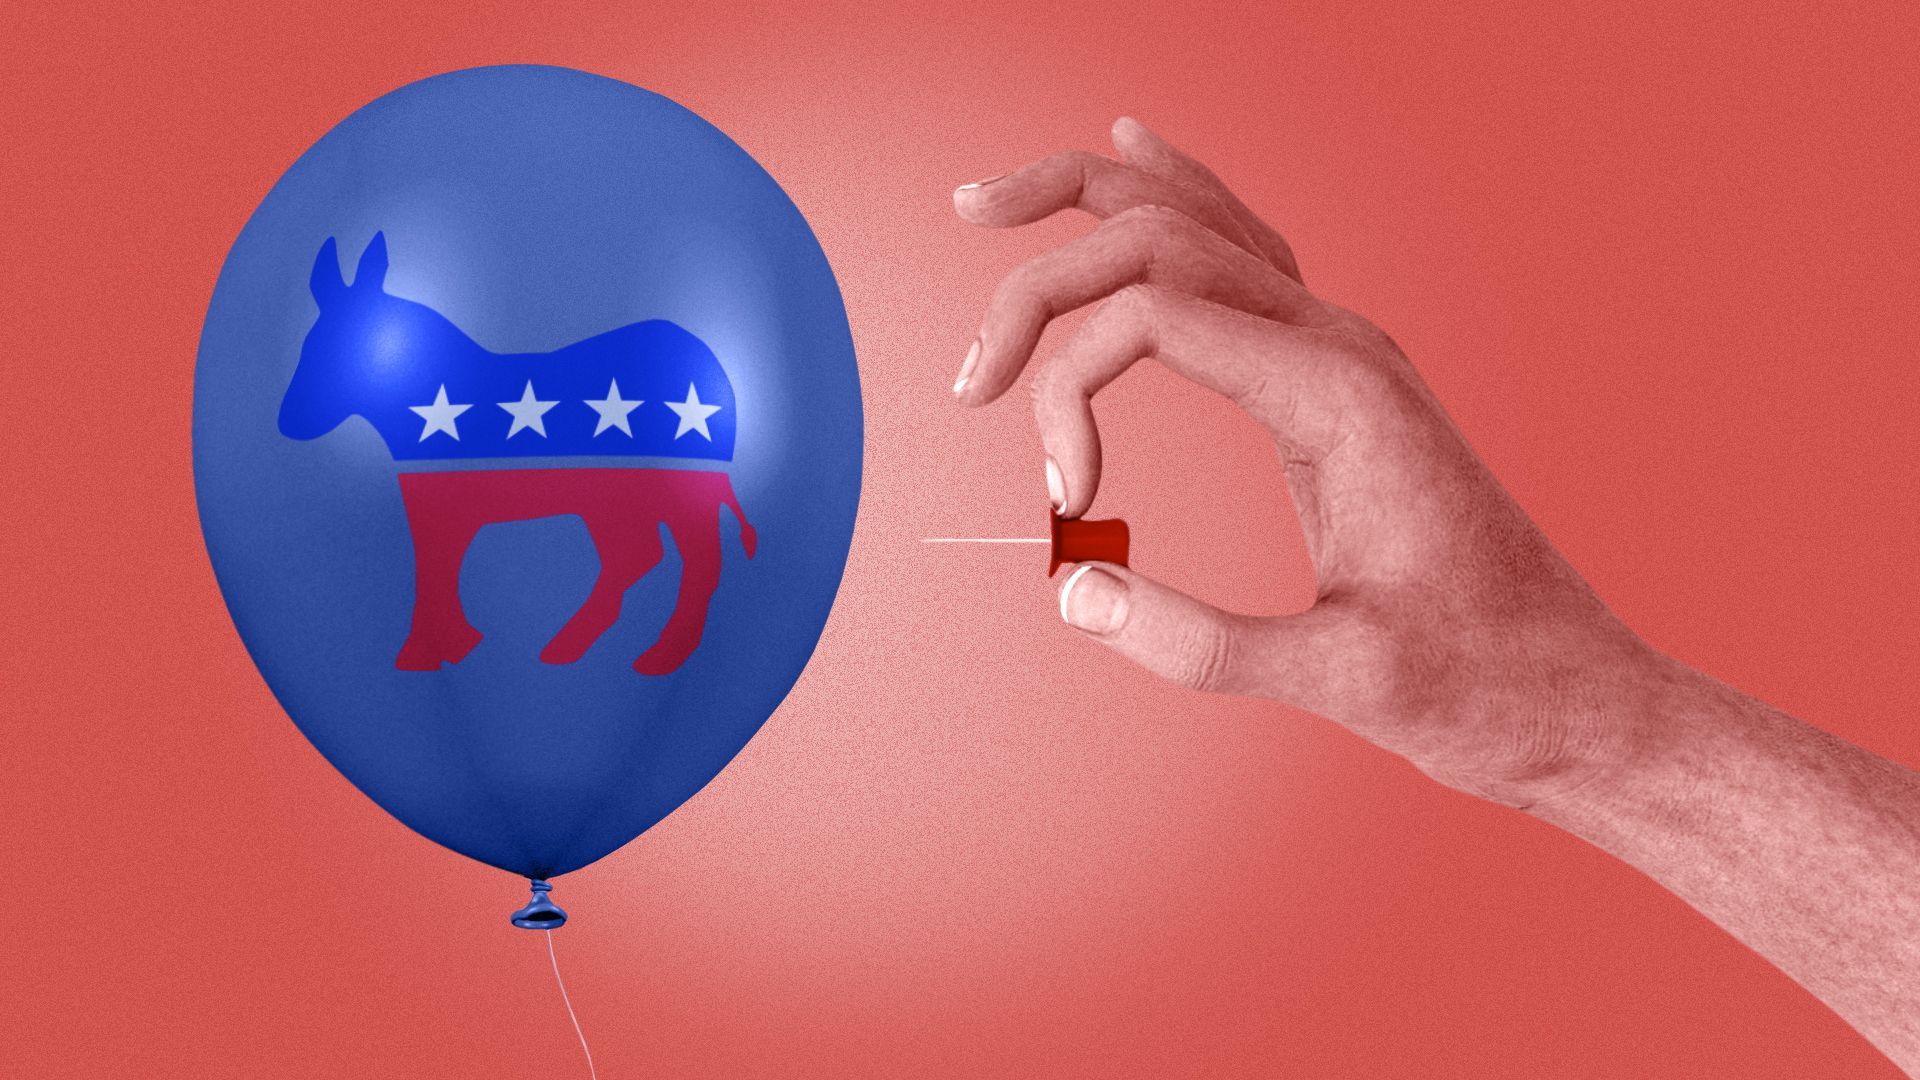 Illustration of a hand reaching to pop a balloon featuring the Democrat logo.